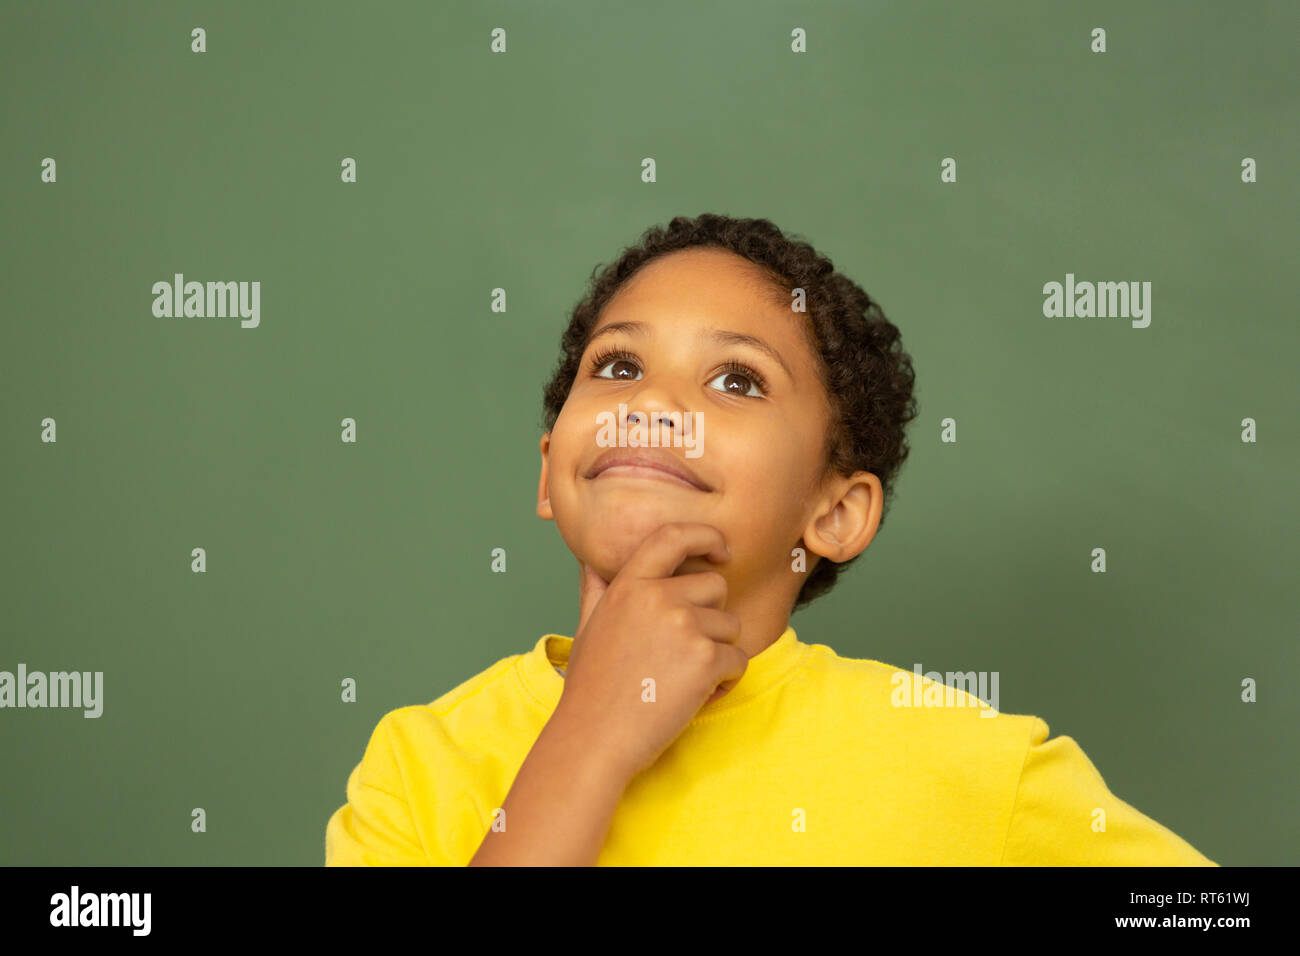 Thoughtful schoolboy standing against greenboard in a classroom Stock Photo